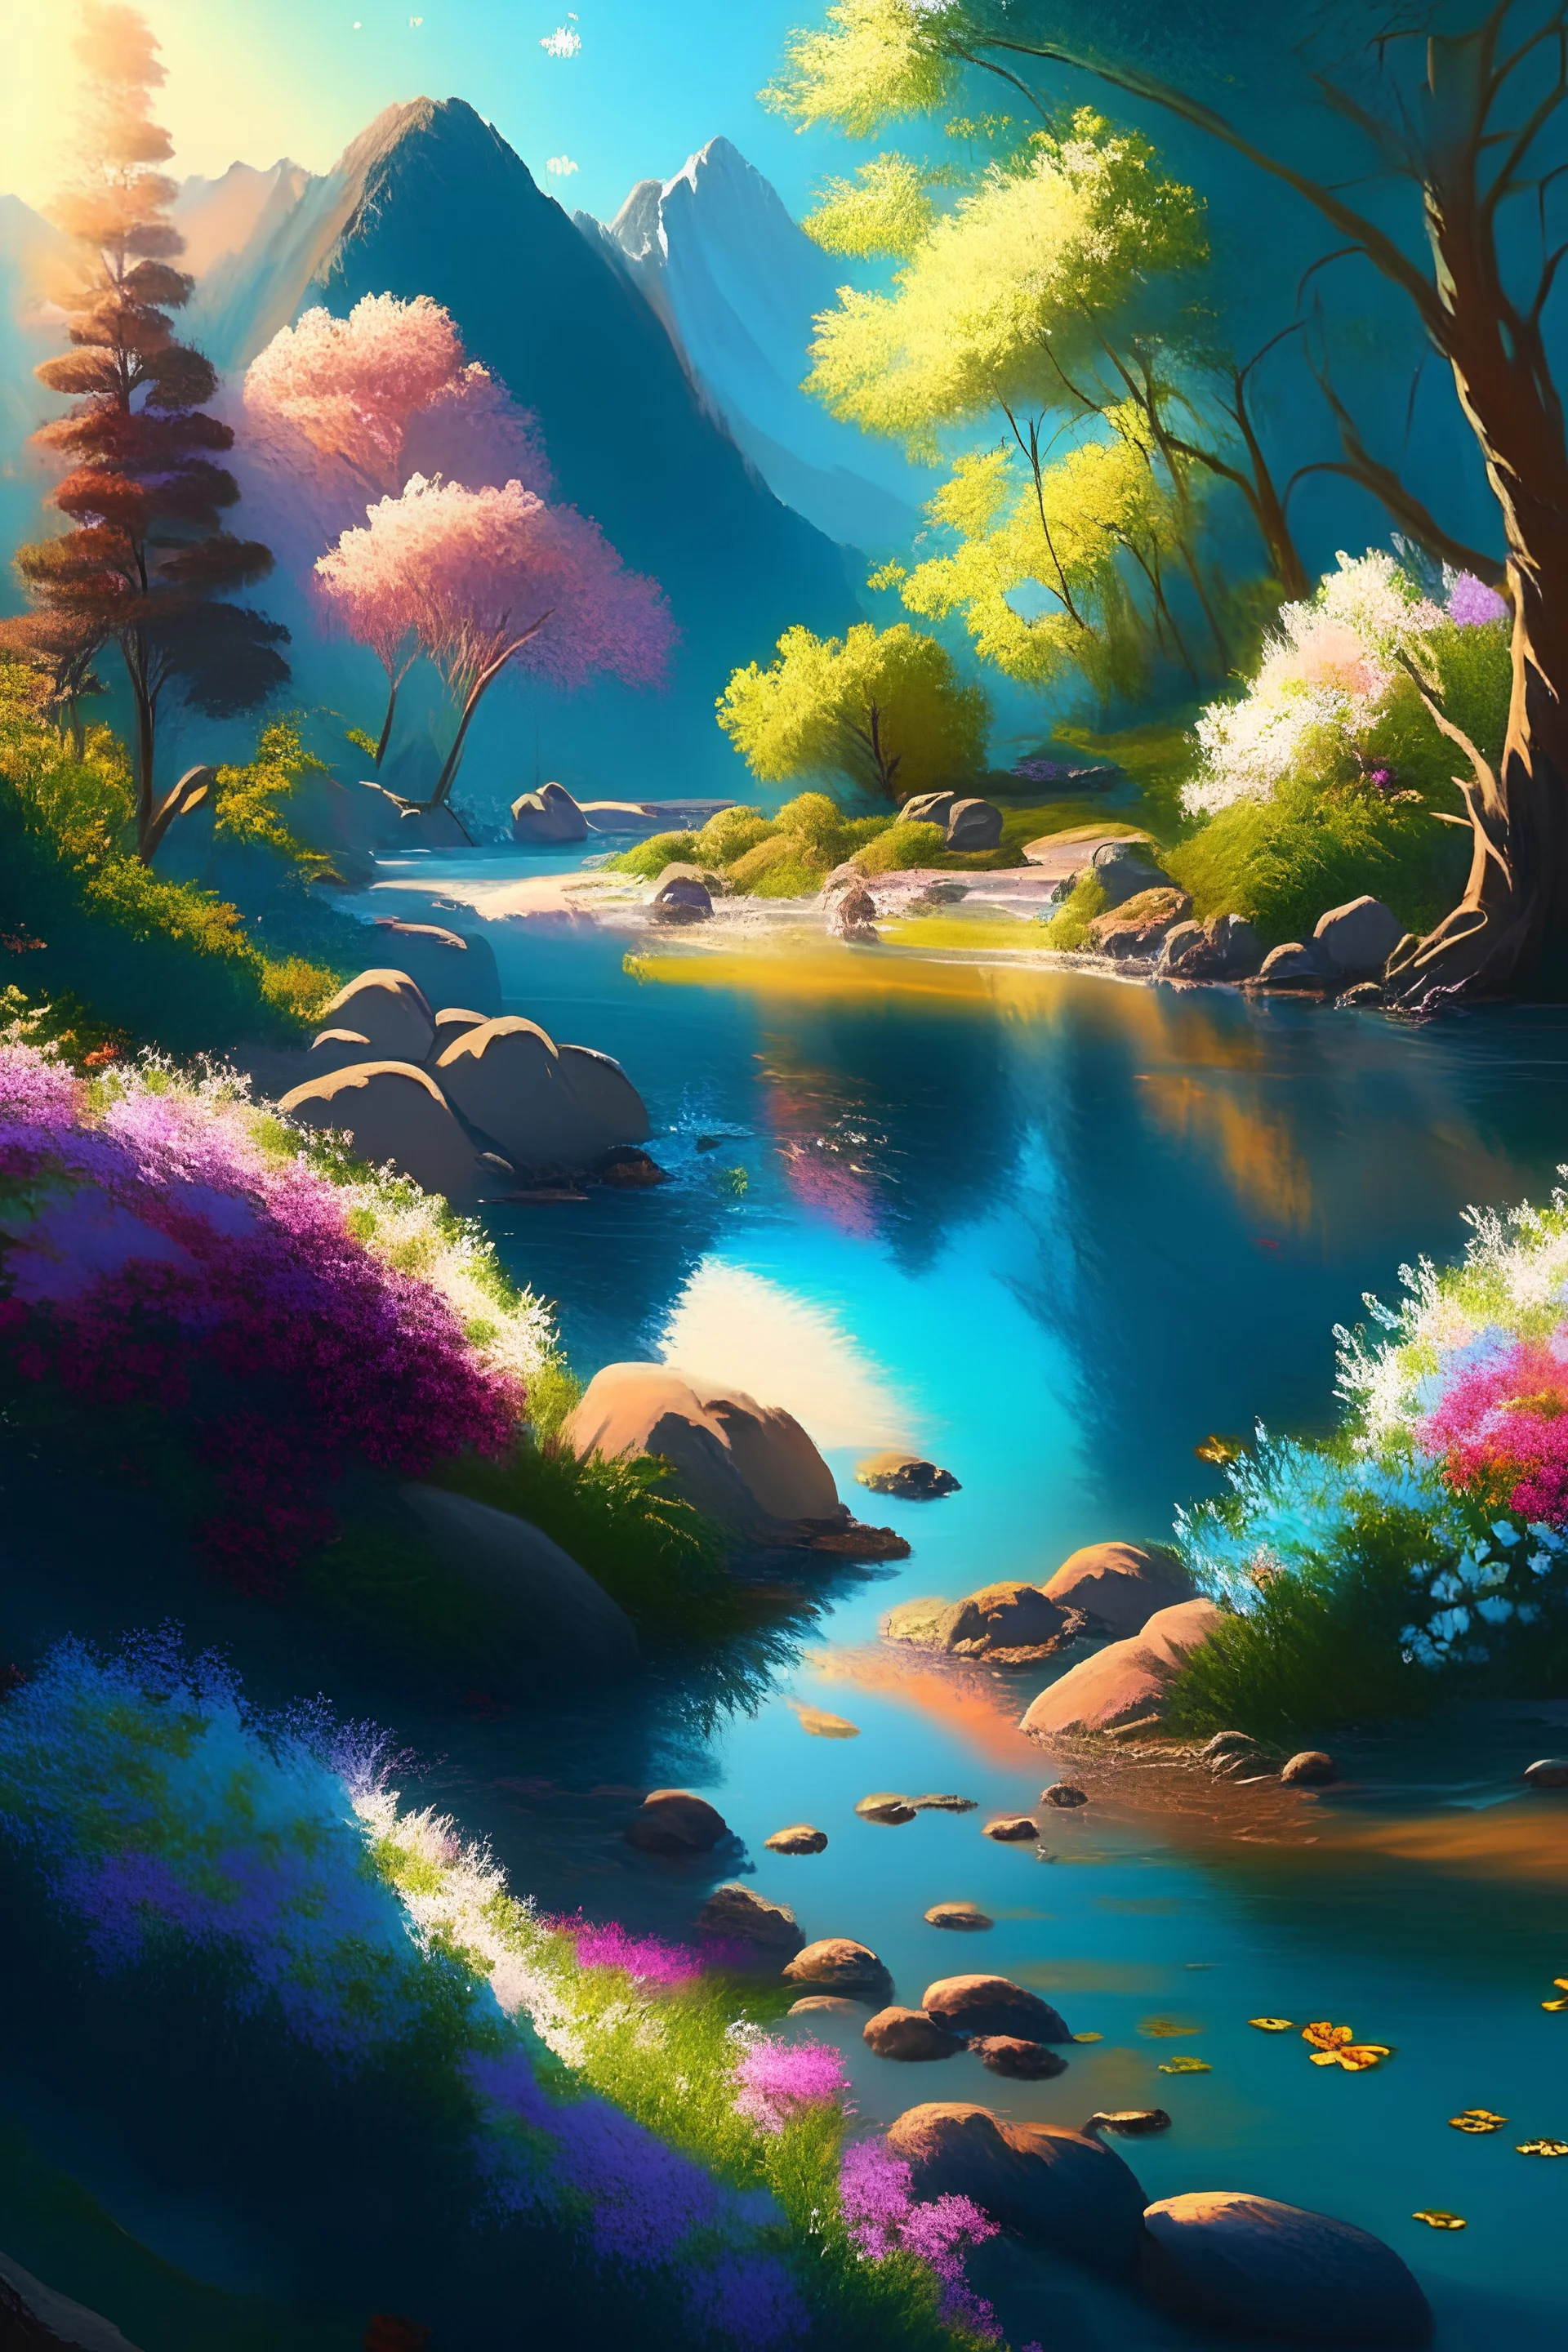 full light,highlight, trees, river, day, sun day, an idyliic forest with bright colorful flowers, mountains, sun,flower, a small river, paradise